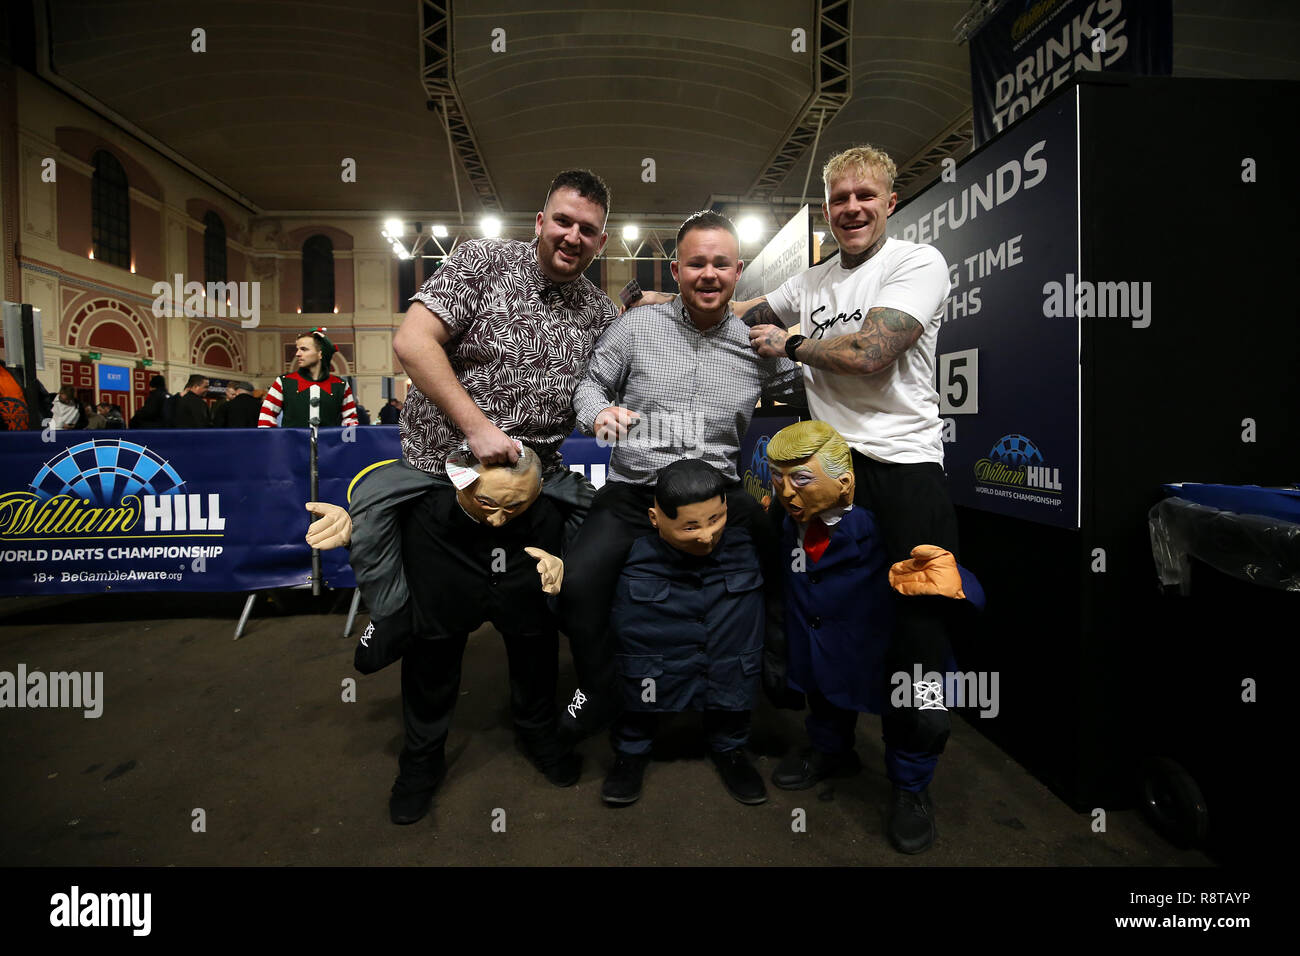 Fans wearing Russian President Vladimir Putin, North Korea President Kim Jong-un and President of the United States Donald Trump costumes during day five of the William Hill World Darts Championships at Alexandra Palace, London. Stock Photo